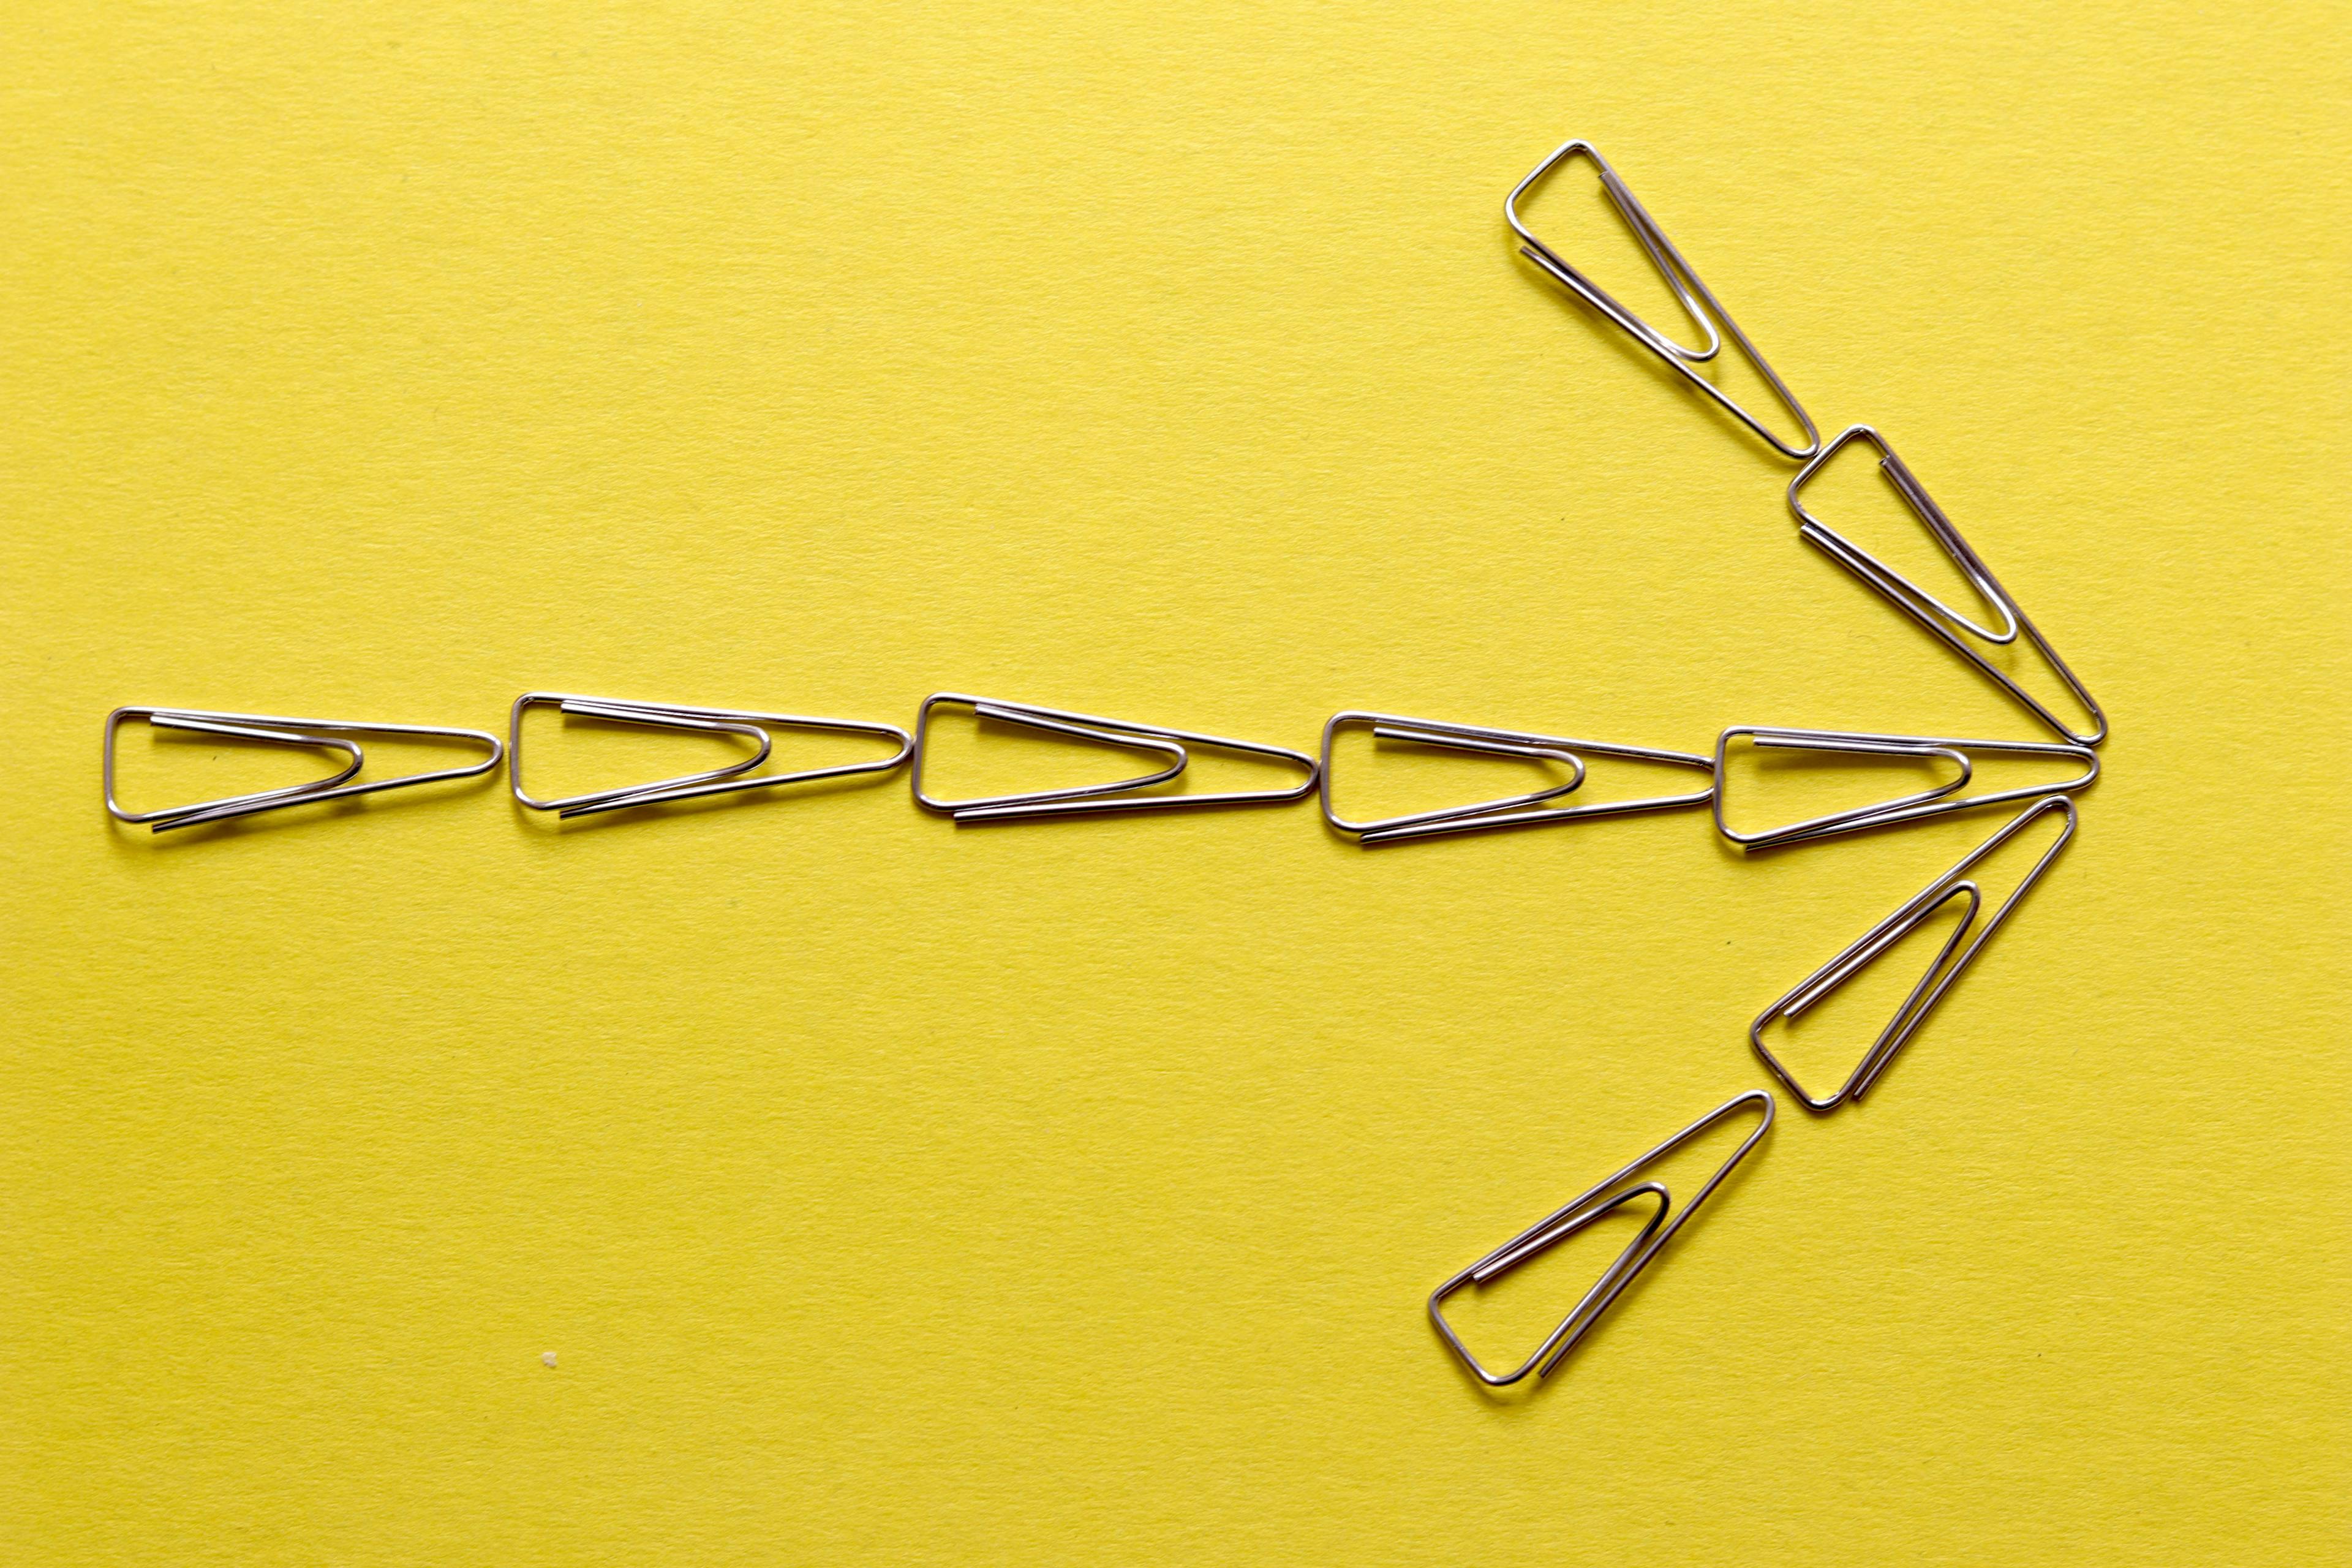 an arrow made of paper clips on a yellow background